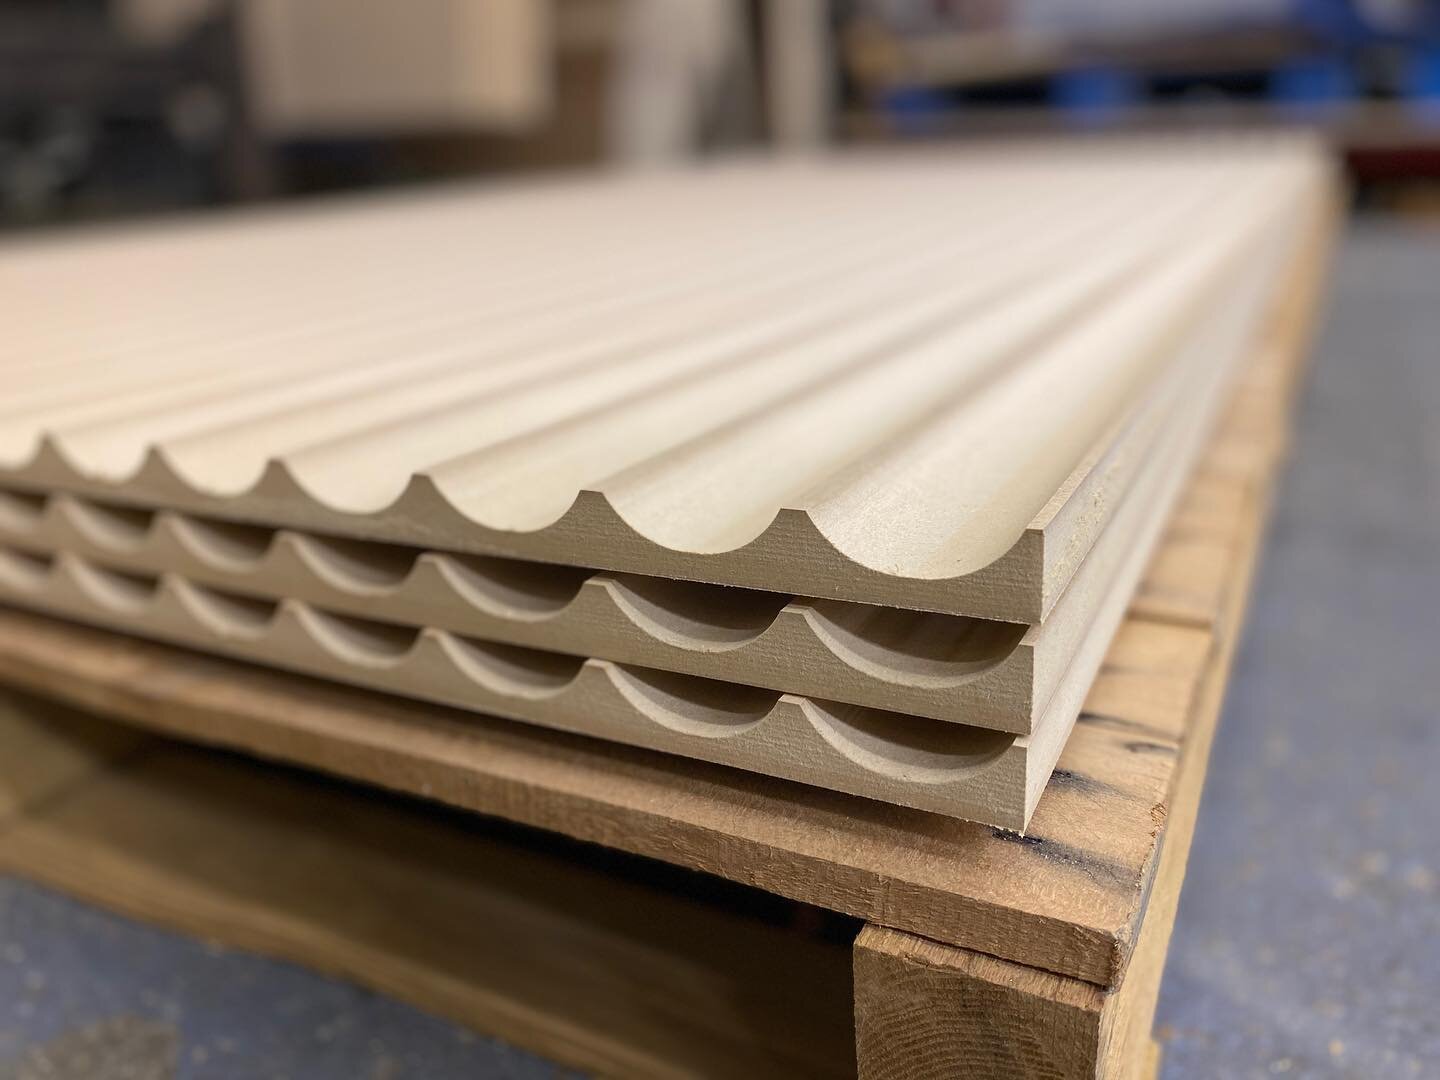 Check out these fluted wall panels we CNC cut in 3/4&rdquo; Medex. These will get painted, sealed and installed in a cafe interior. Our client needed a fast turn around on these as the large scale manufacturer had a 1 month lead time. Email cnc@third